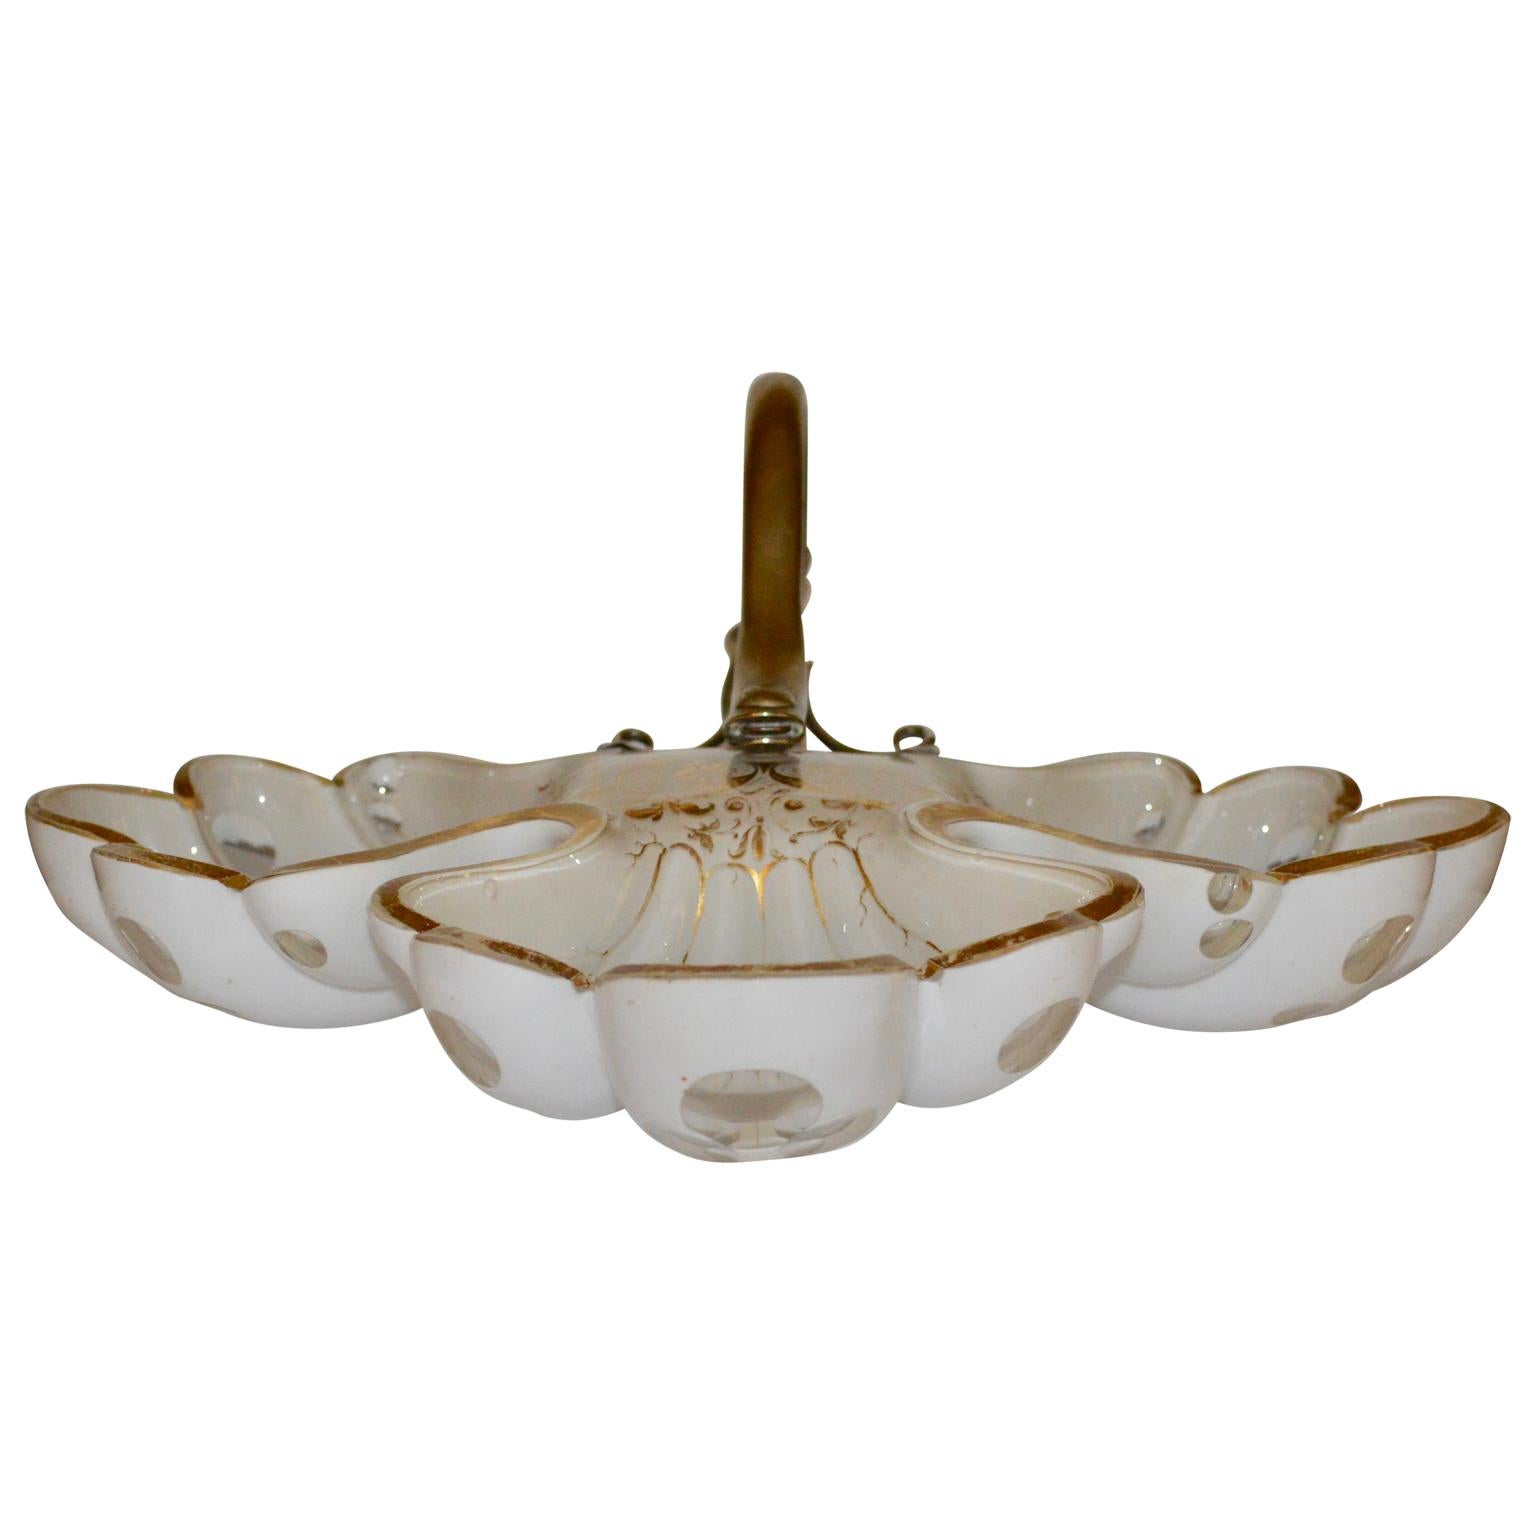 French 19th century white opaline candy dish with brass snake hardware.
The opaline has golden decorations on the edges.